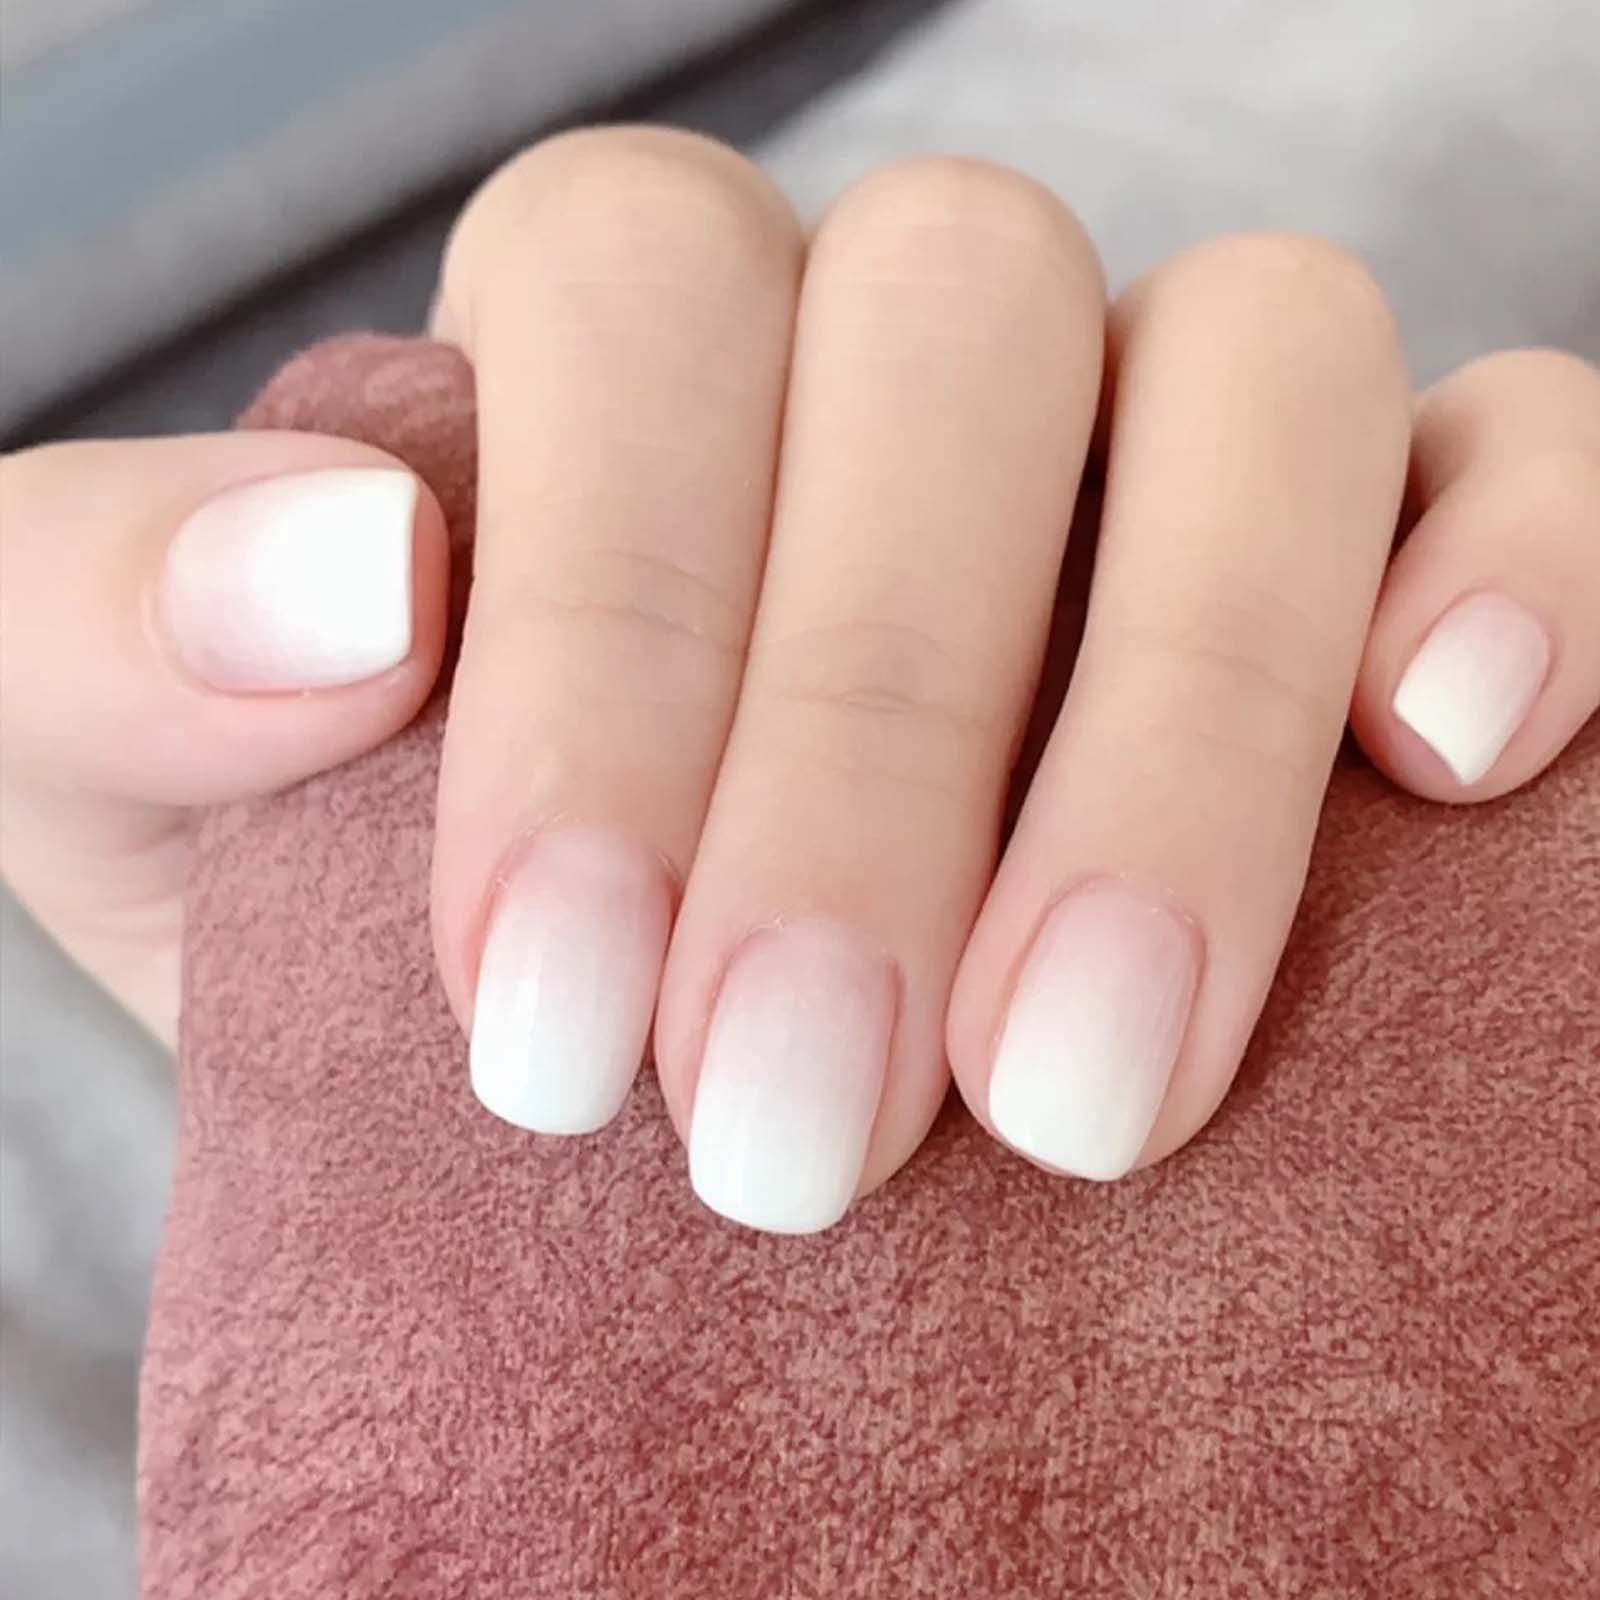 31 Christmas Acrylic Nails to Try This Holiday Season | Glamour